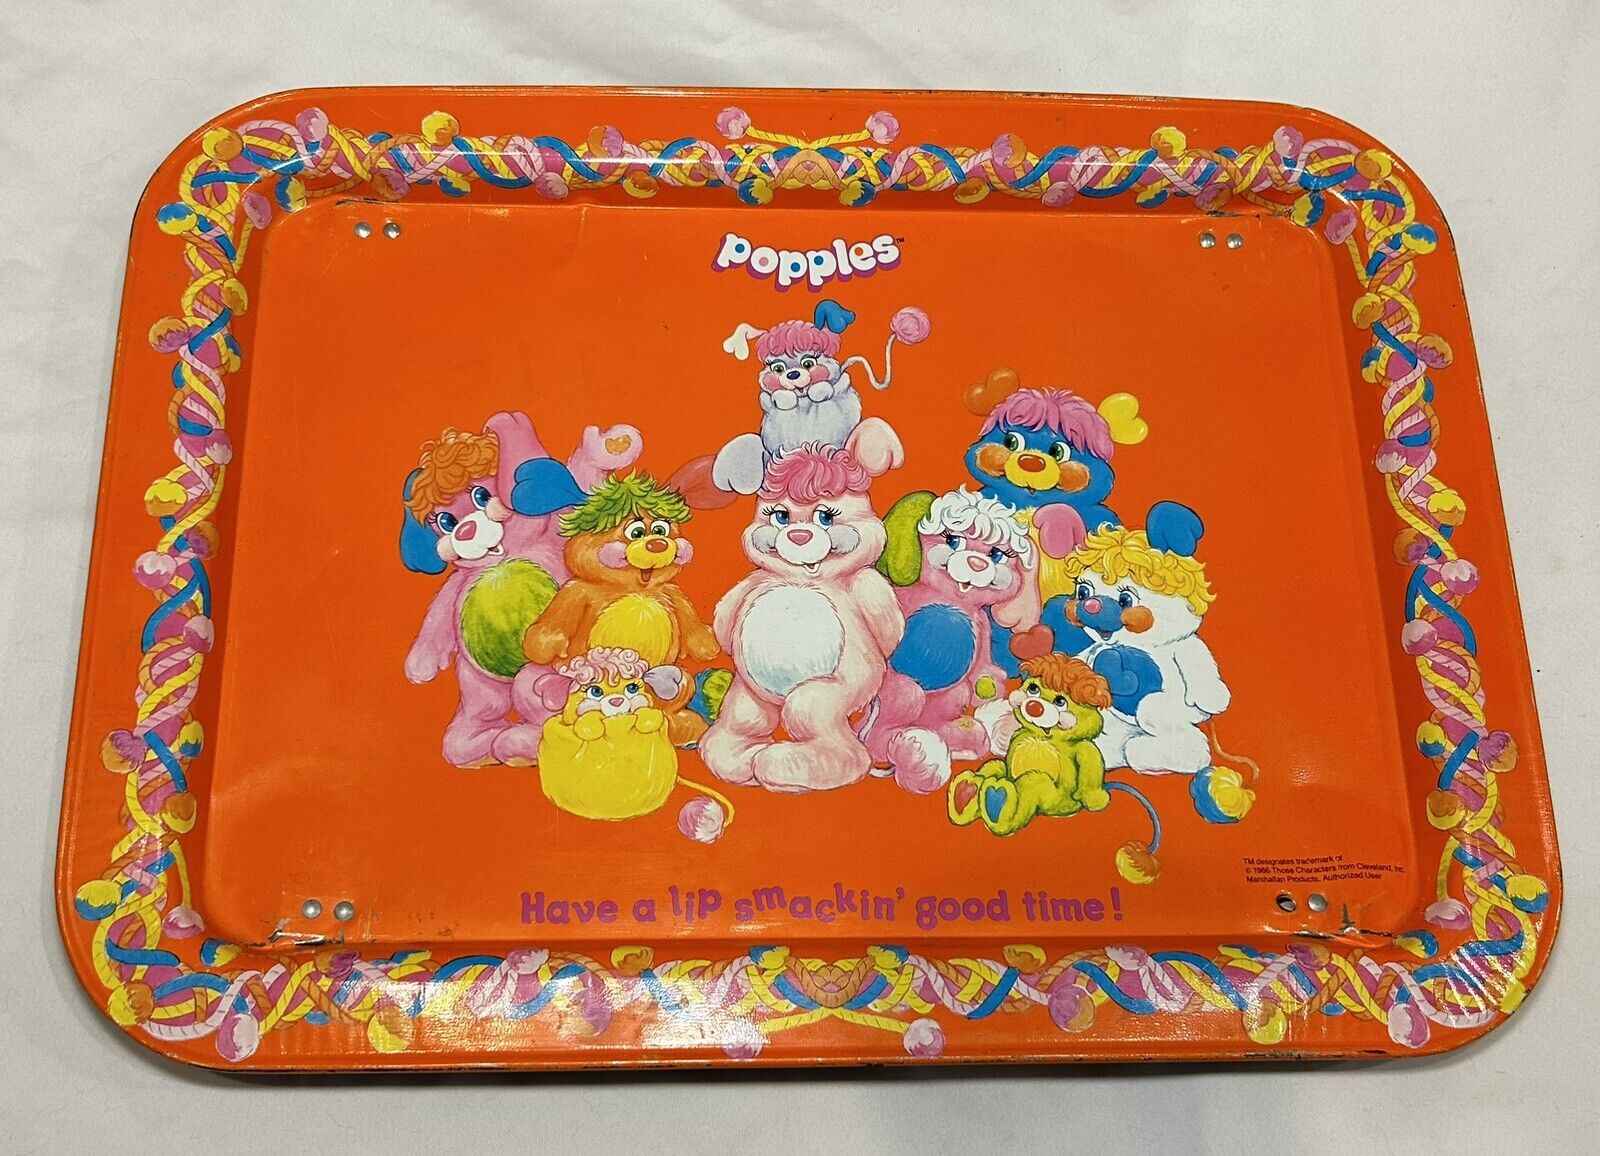 Popples Folding Tray VTG1986 Have a Lip Smacking ' Good Time Metal TV Legs